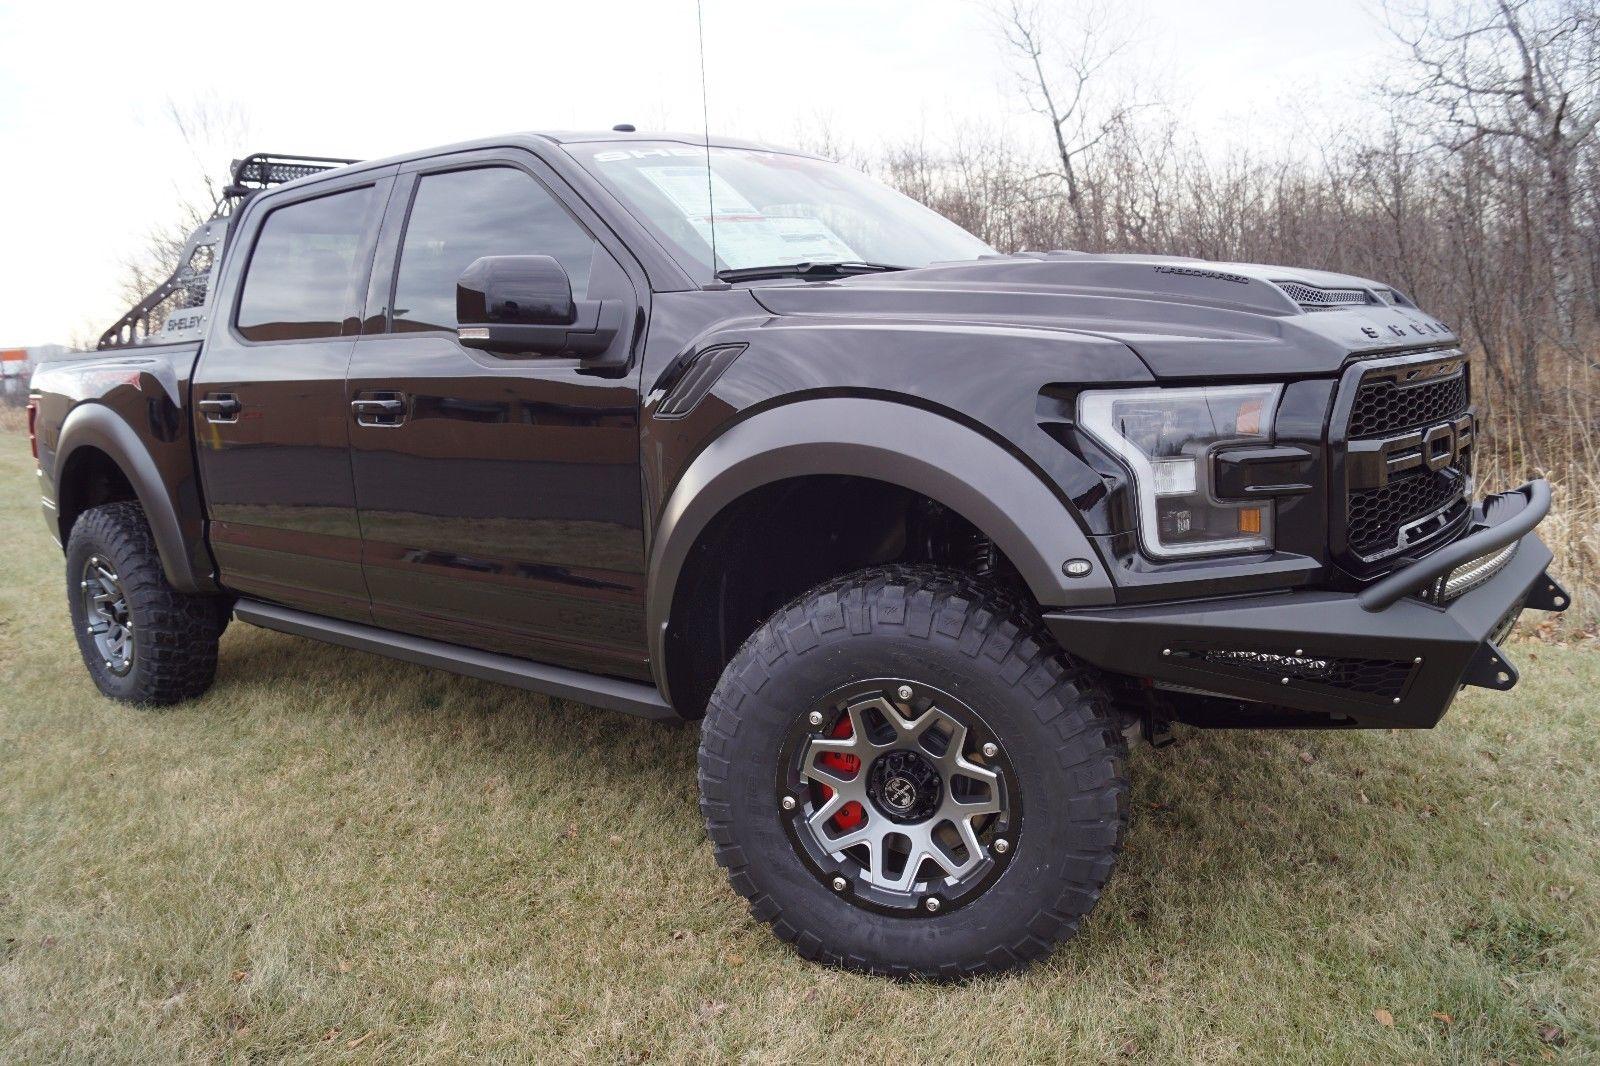 For sale: strong beast 2018 Ford F 150 Shelby Baja Raptor 525 HP lifted